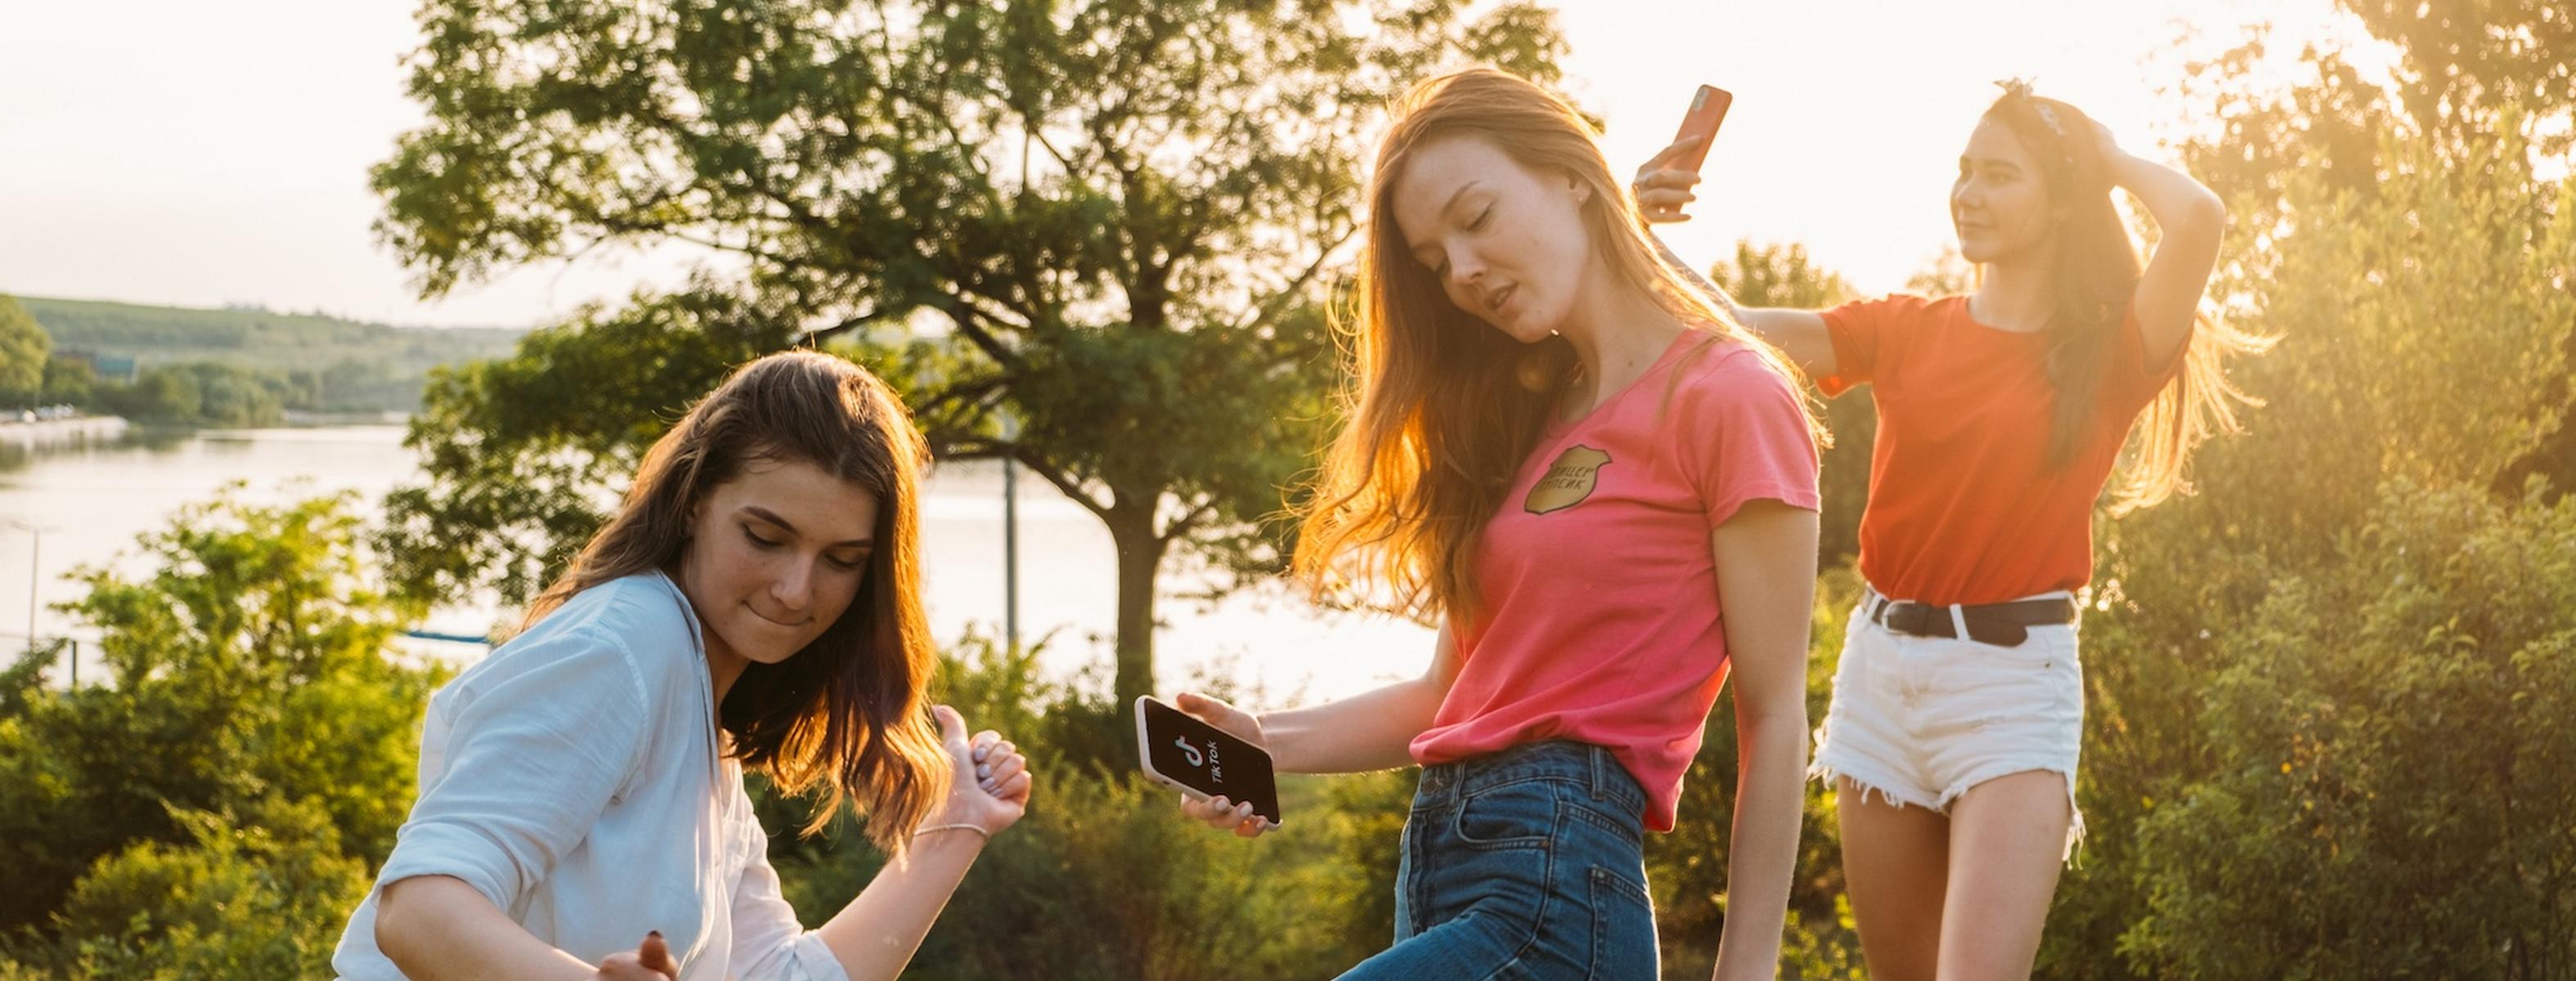 Capturing Gen Z Attention: Top Trends Marketers Need to Know in